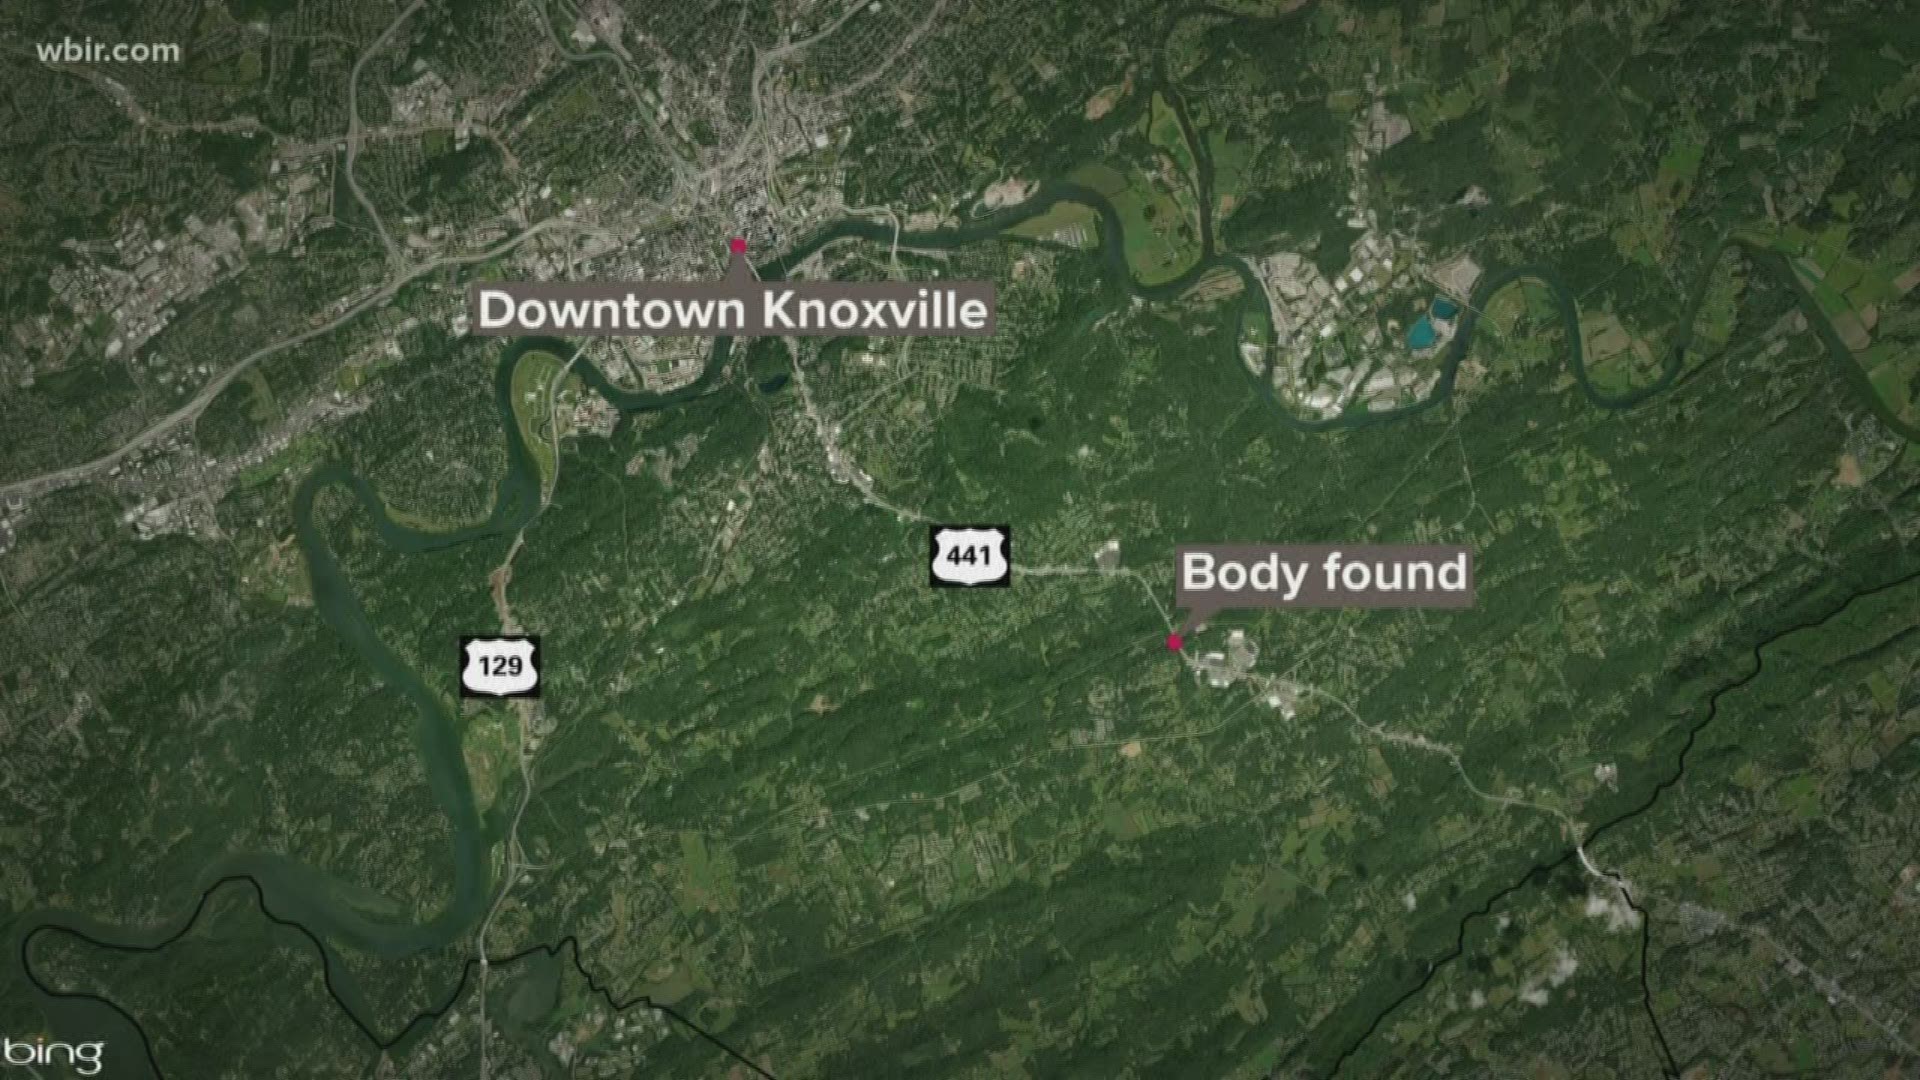 Knoxville police launched a homicide investigation into a body found in South Knox County.